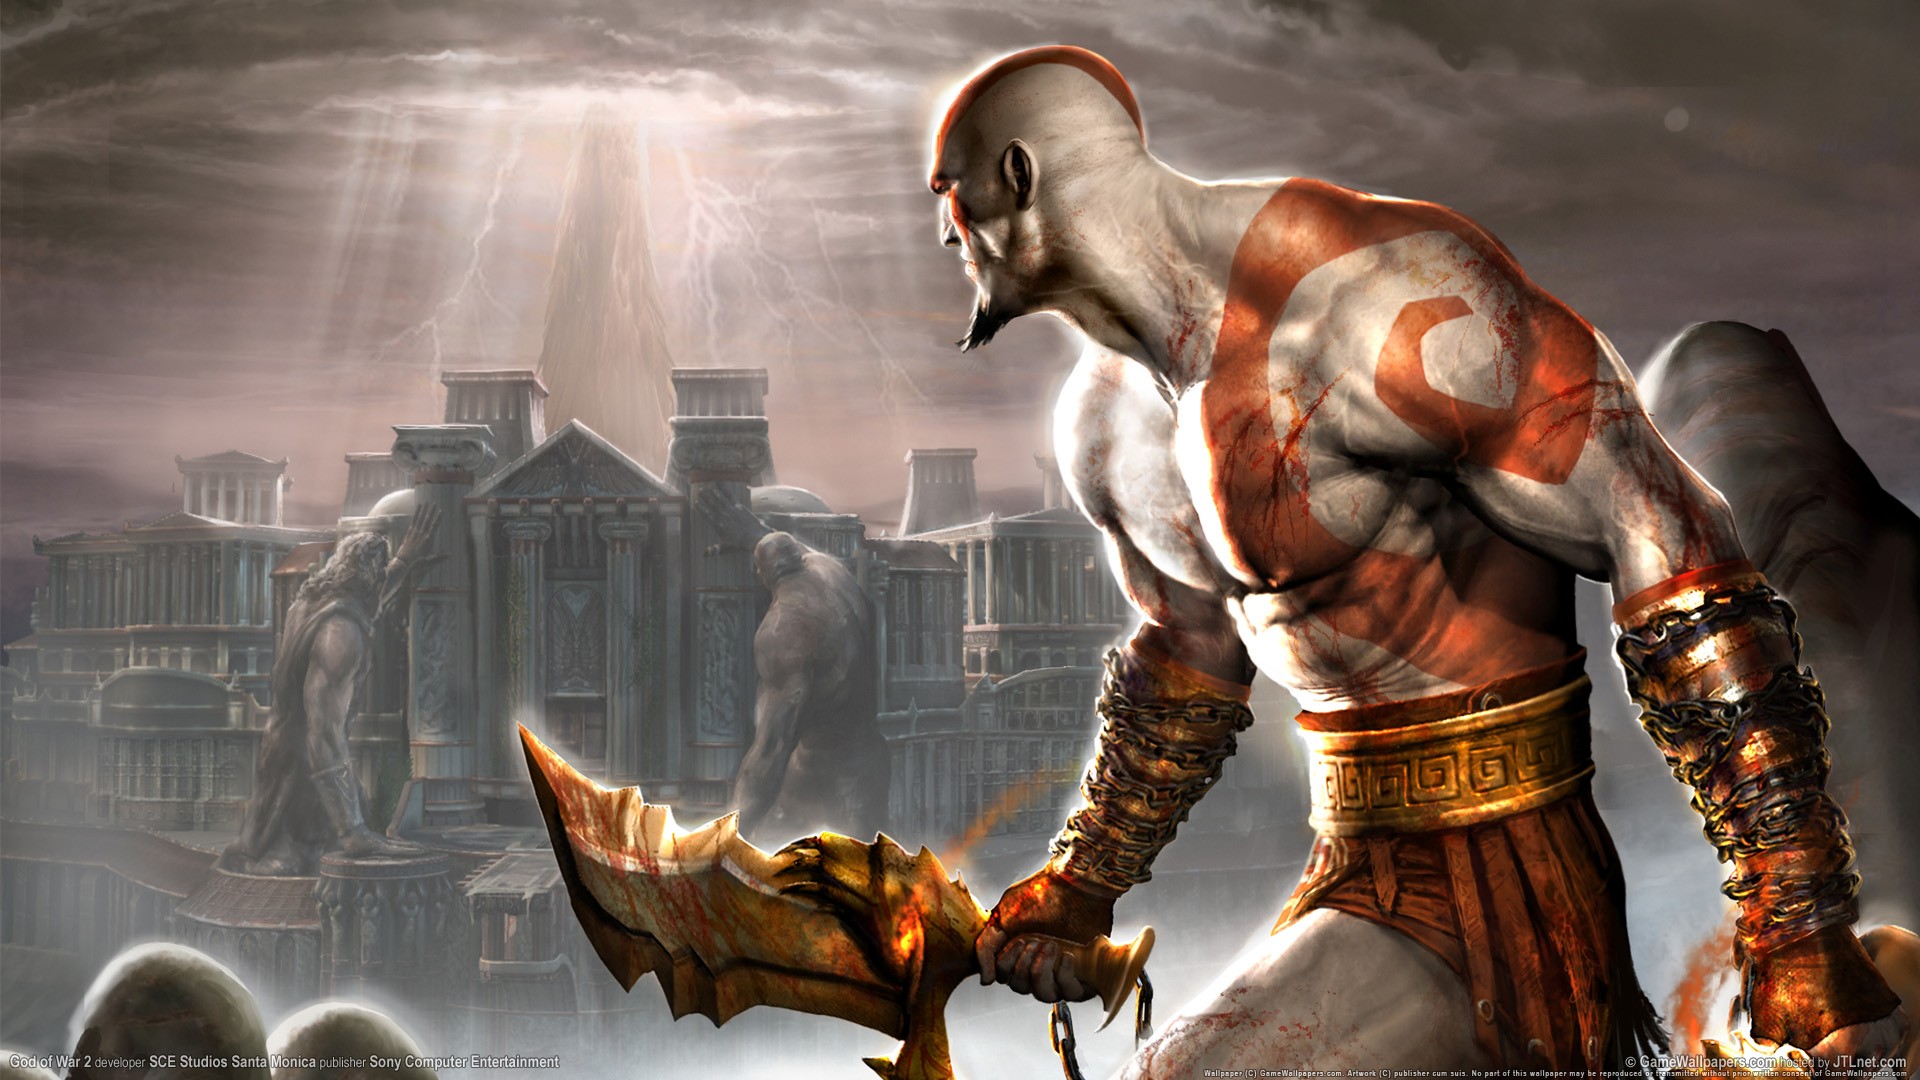 god of war wallpaper hd,action adventure game,pc game,cg artwork,fictional character,games